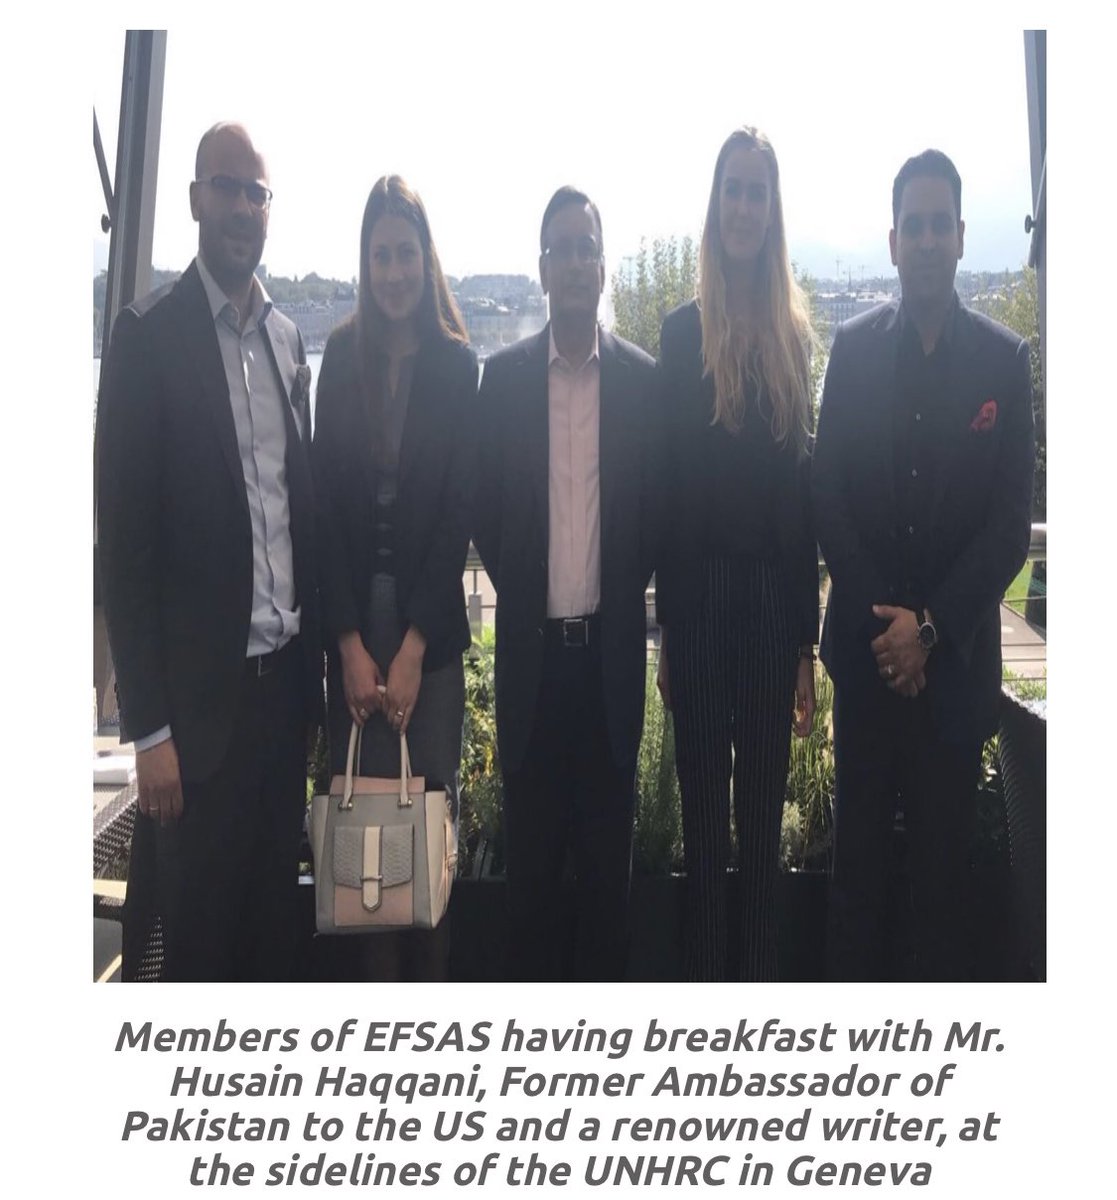 A month before that Hussain Haqqani hosted entire propaganda gang from EFSAS for “breakfast” in Geneva including Junaid Qureshi the Director of EFSAS & son of RAW operative who hijacked an aeroplane in 1971 on 25 September 2017.Link here: https://www.efsas.org/events/sessions-of-unhrc/breakfast-with-mr.-haqqani//3